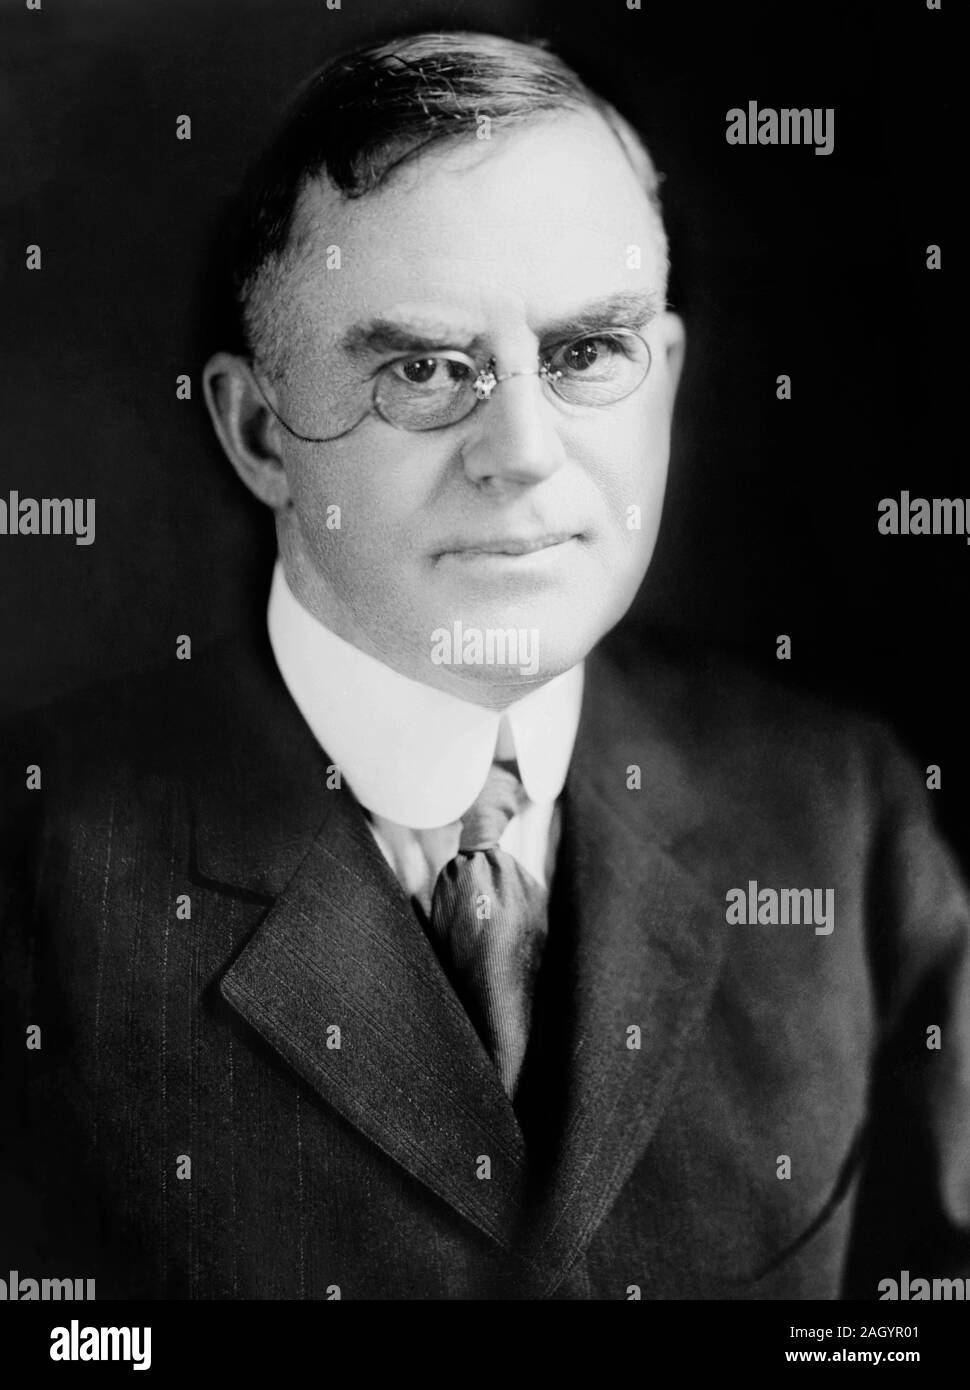 H.C. Wallace - Henry Cantwell "Harry" Wallace (May 11, 1866 – October 25, 1924) was an American farmer, journalist, and political activist who served as the Secretary of Agriculture from 1921 to 1924. He was the father of Henry A. Wallace, who would follow in his footsteps as Secretary of Agriculture and later became Vice President under President Franklin D. Roosevelt. Stock Photo